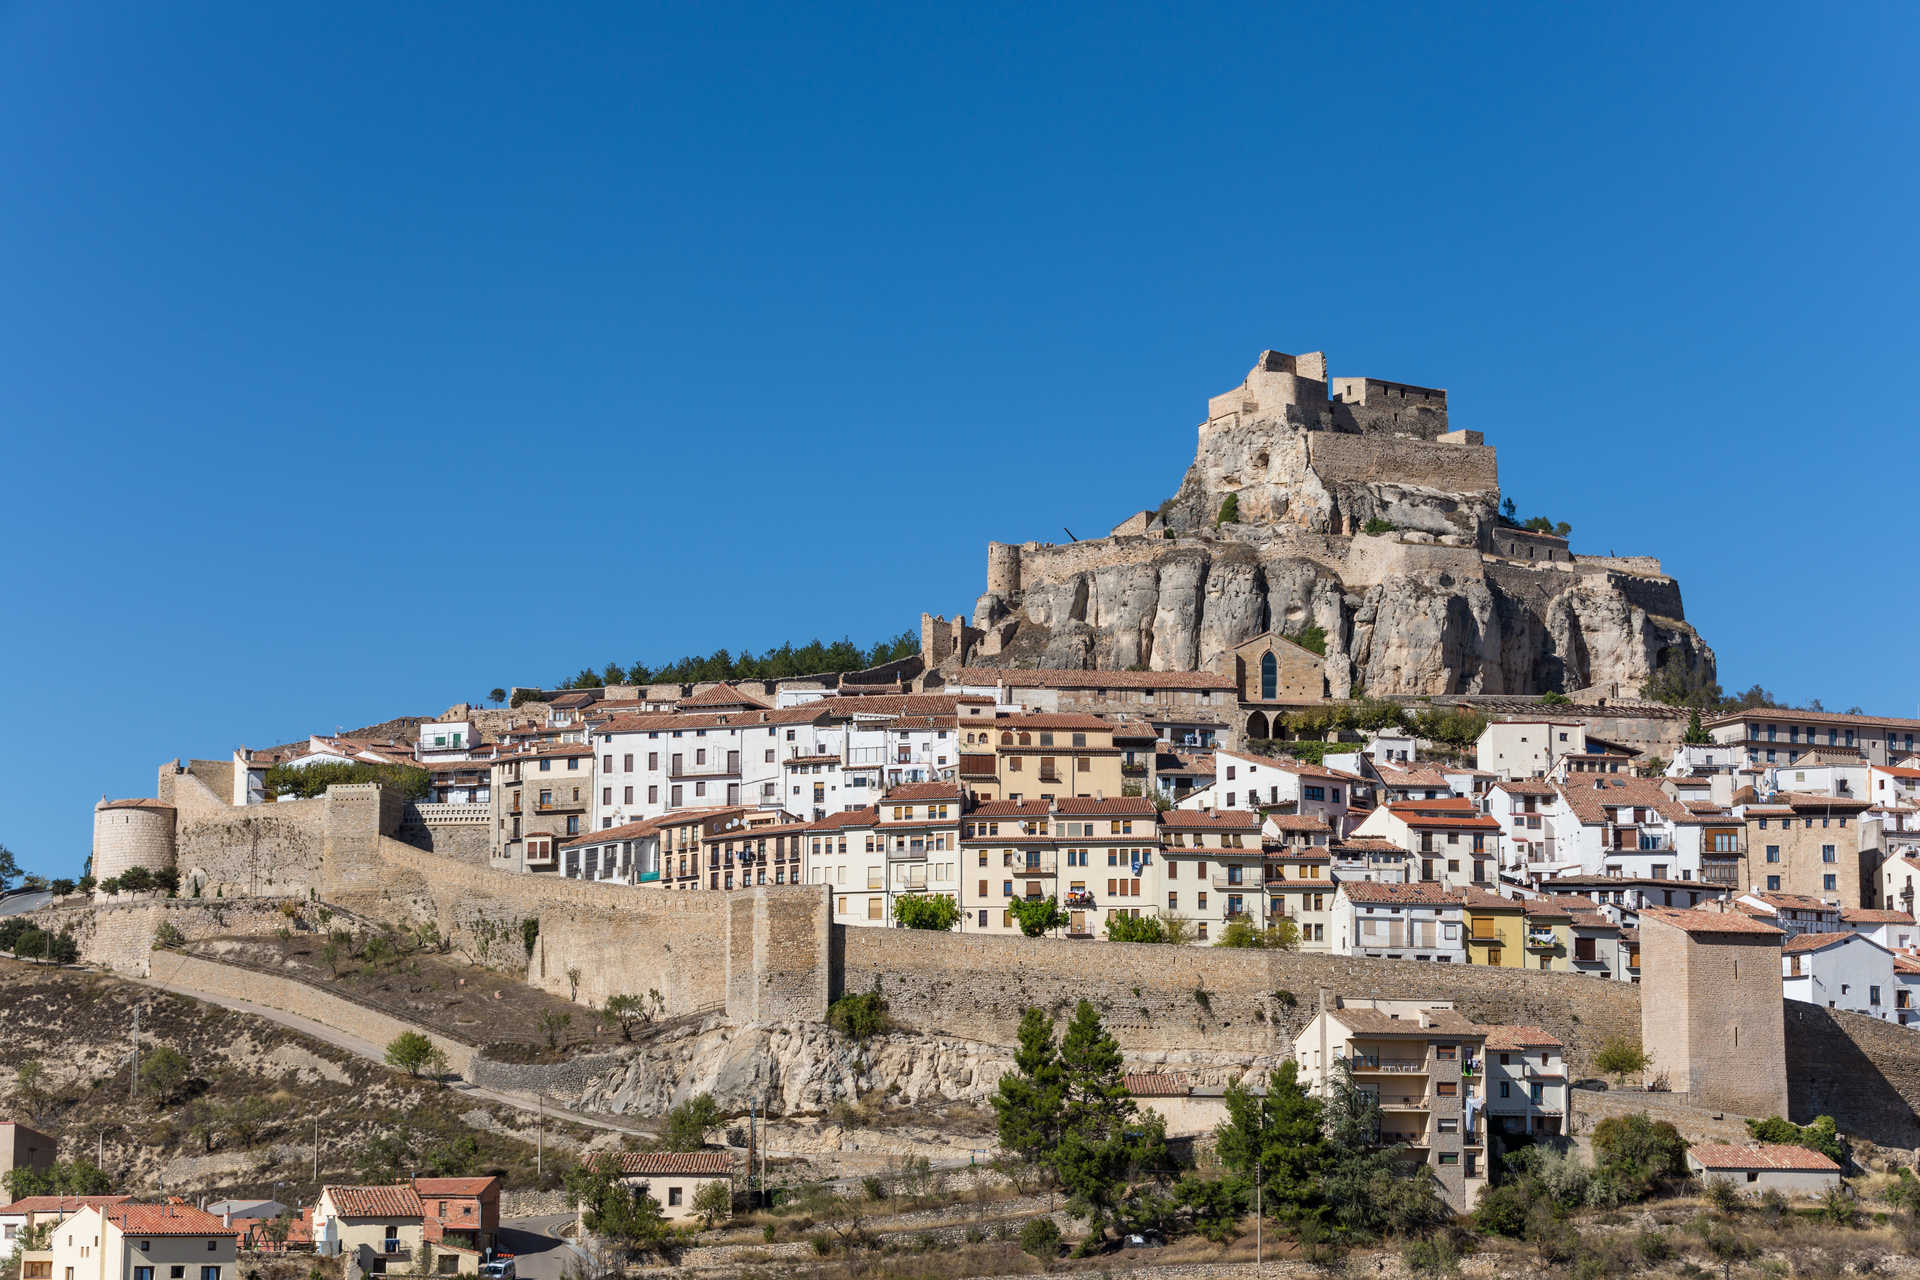 The old town of Morella